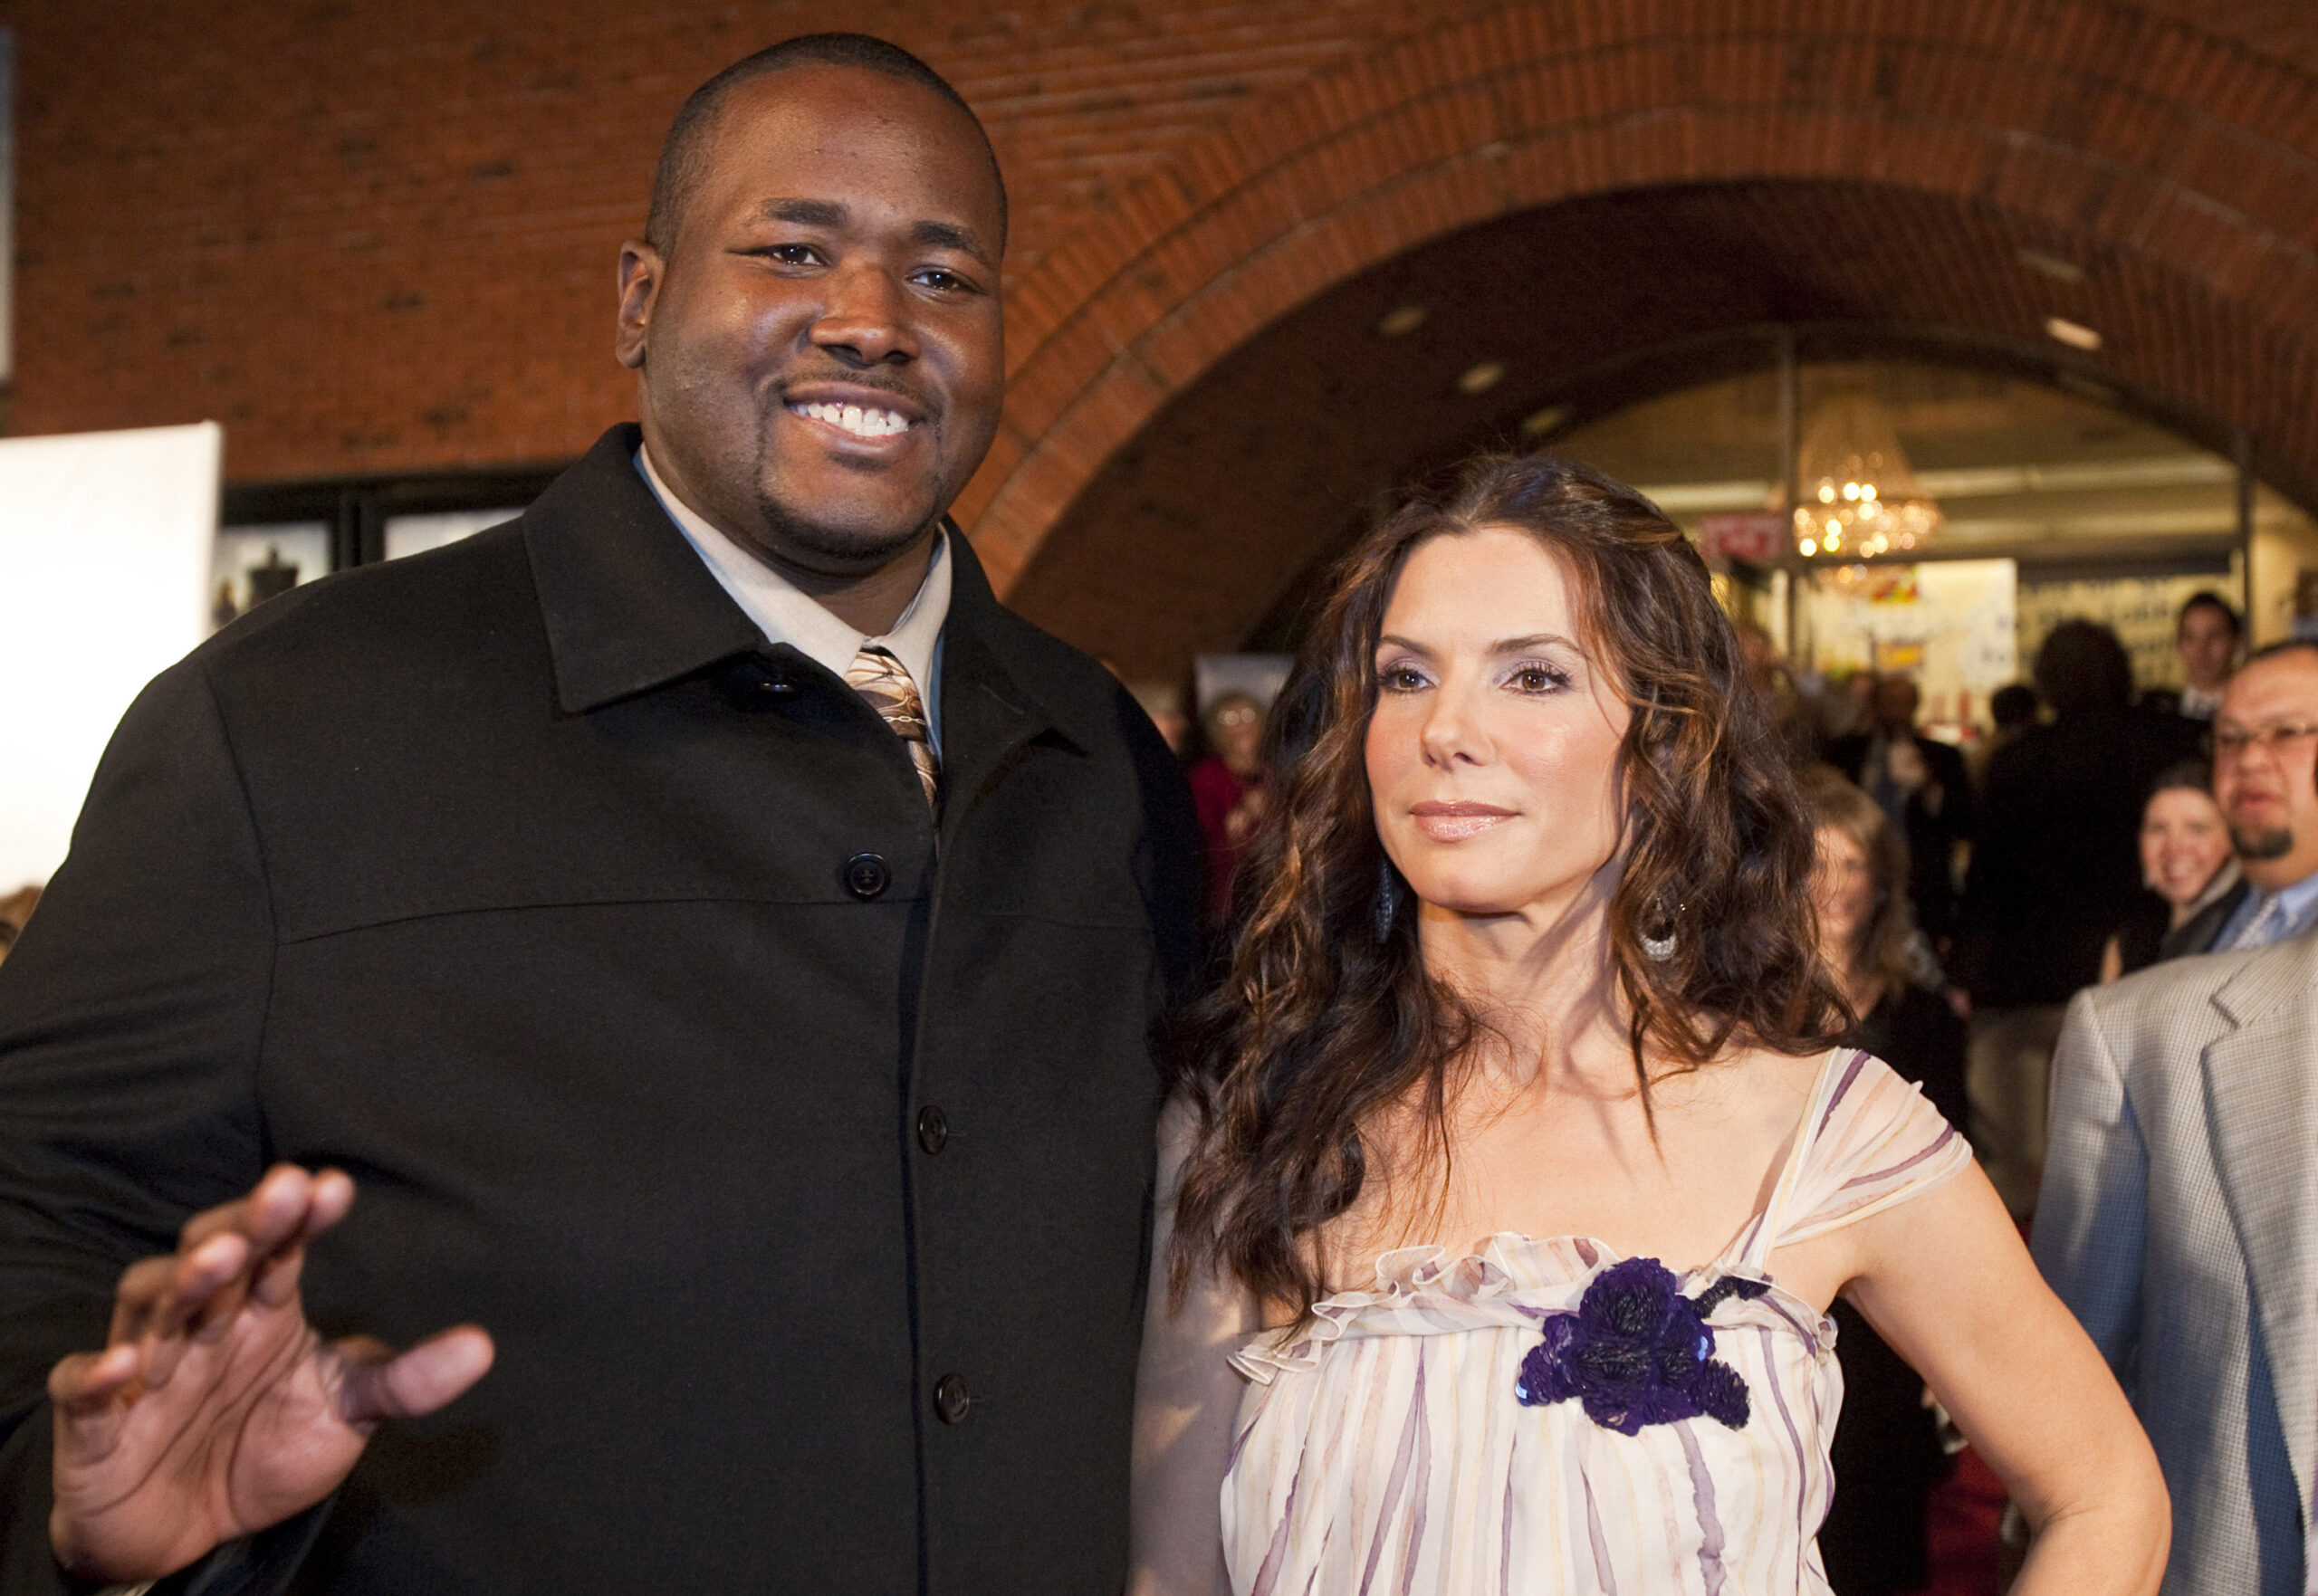 Sandra Bullock's 'The Blind Side' Costar Wants People To Leave Her